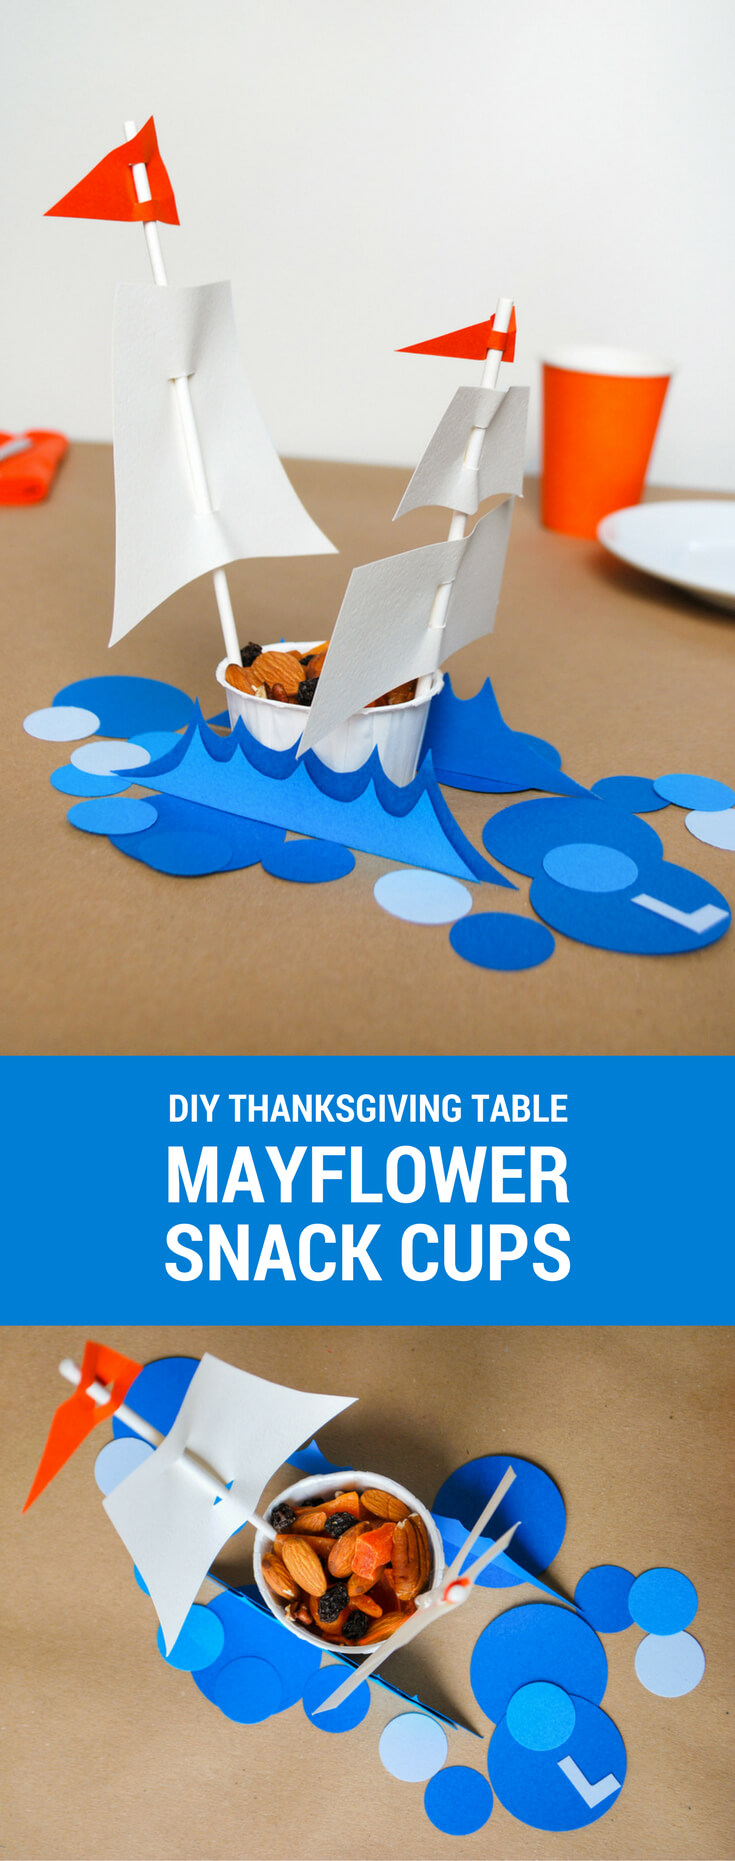 DIY Mayflower snack cups for the Thanksgiving dinner table - fill with dried fruits and nuts | Thanksgiving table decorations | Thanksgiving tablescape #thanksgiving #thanksgivingtable